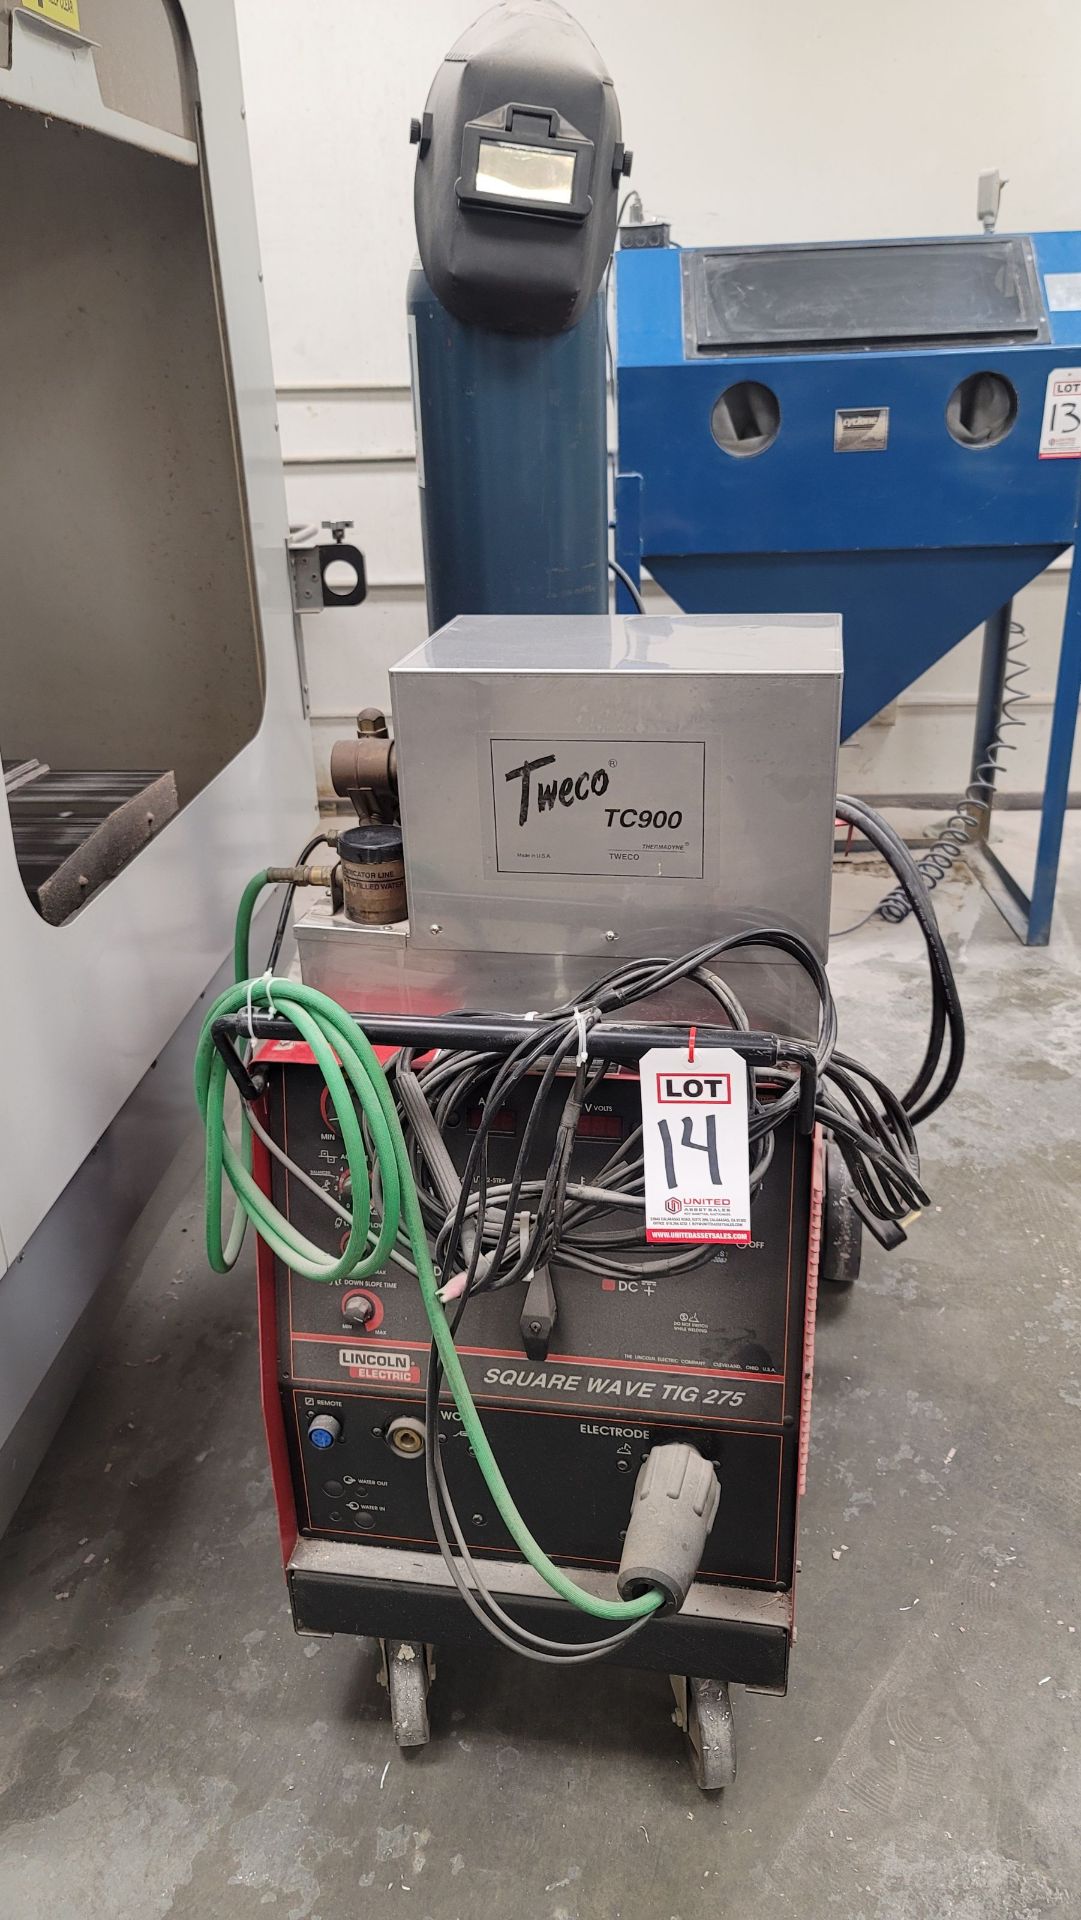 LINCOLN SQUARE WAVE TIG 275 WELDER, S/N 10605-U1981200024, TWECO TC900 WATER COOLER, PORTABLE, S/N - Image 2 of 7